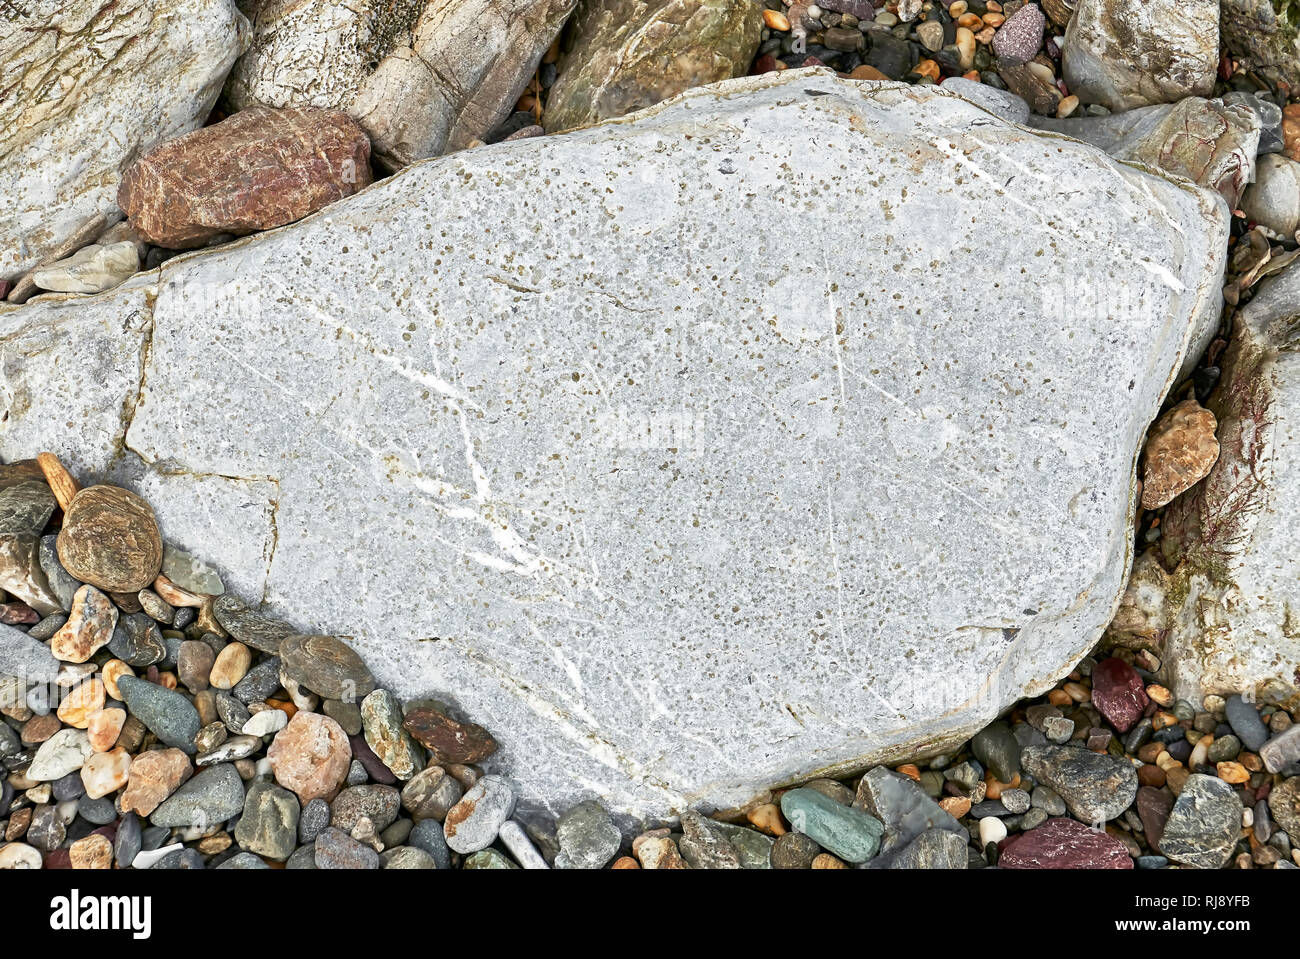 Big flat, roundish, gray colored stone, framed by other smaller stones and pebbles at a coastline in the Philippines. Ideal for placing text on it. Stock Photo